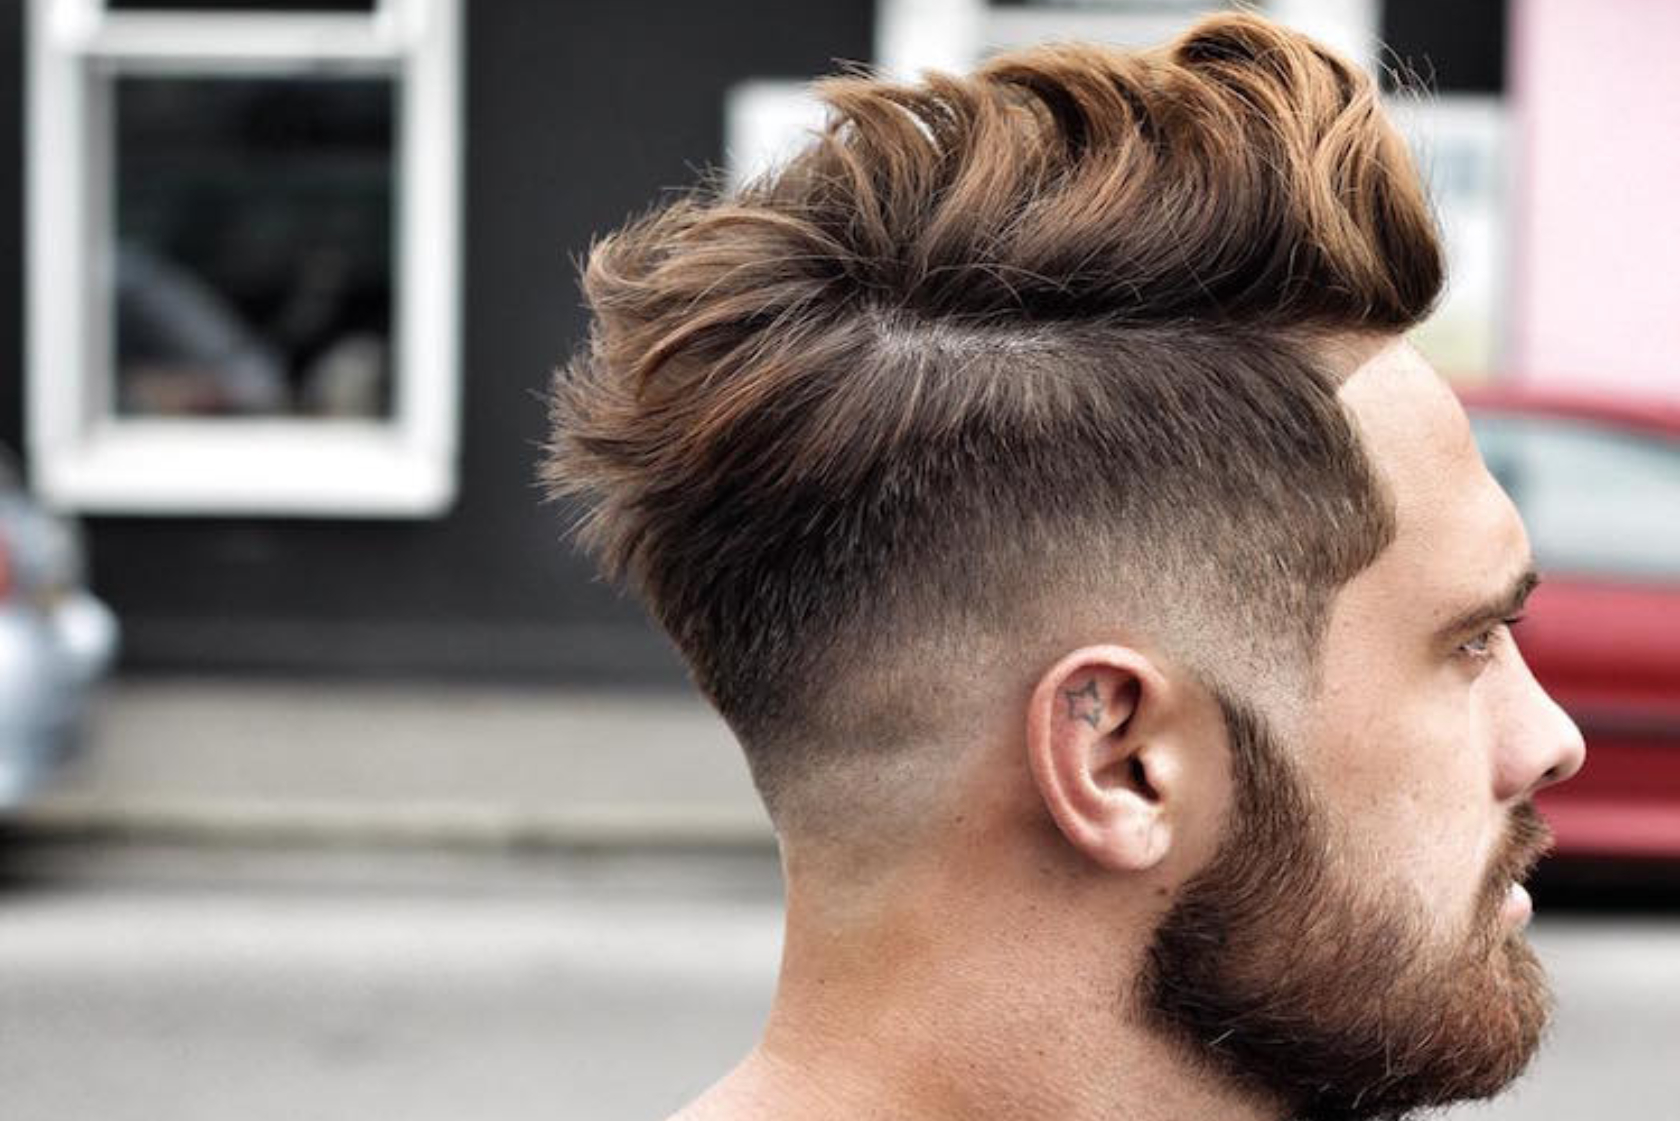 Texture Skin Fade - Skin fade accompanied by the sharp and spiky modern  style fringe that gives this haircu… | Skin fade hairstyle, Mens haircuts  fade, Fade haircut